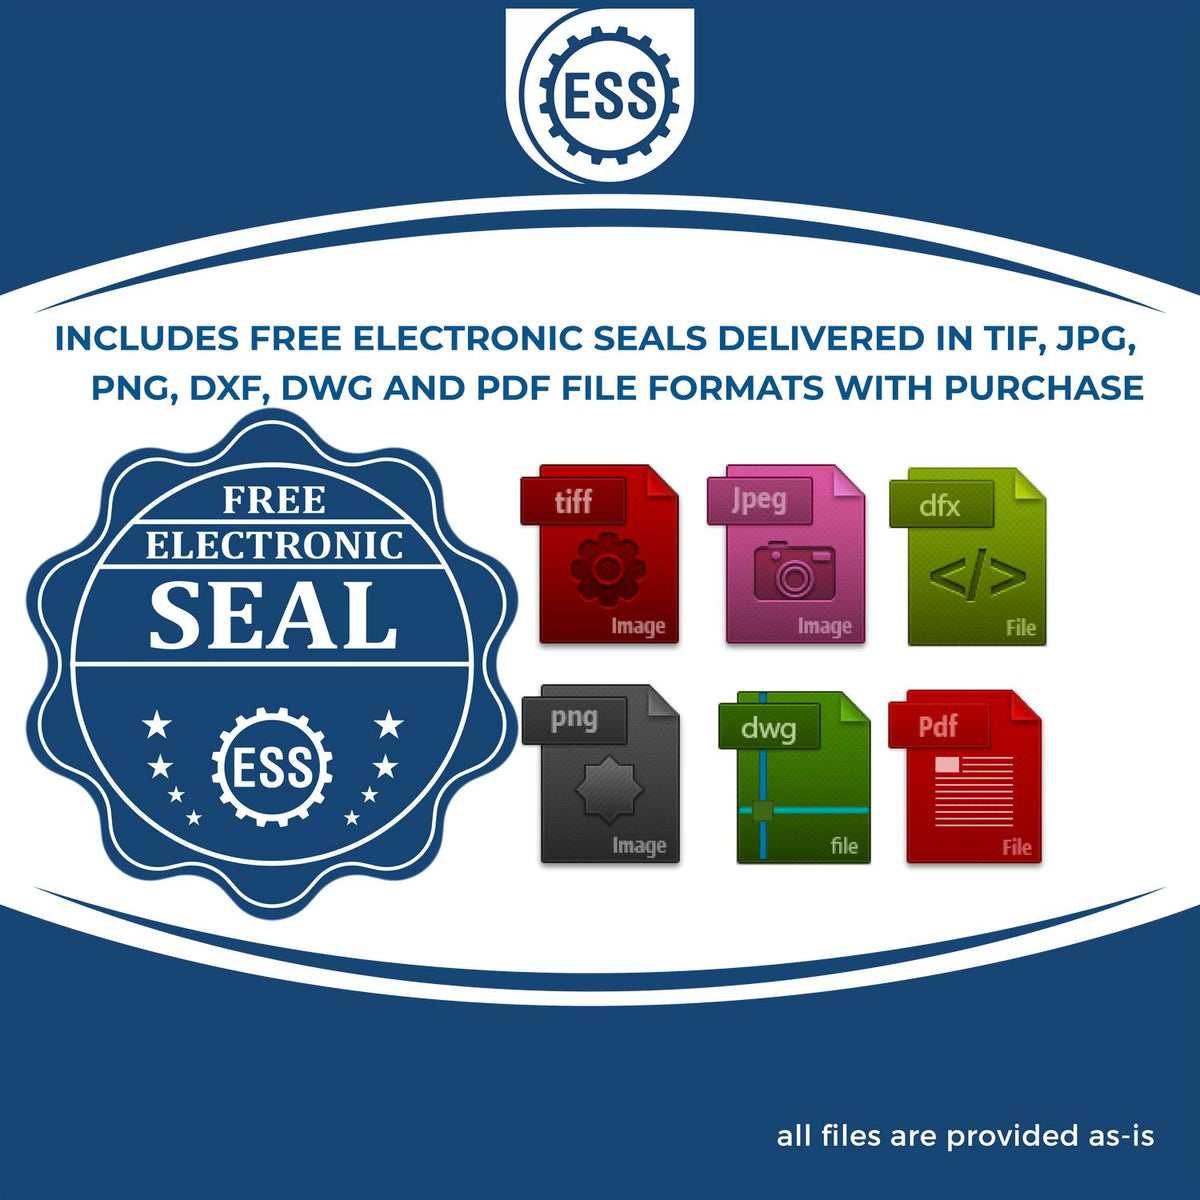 An infographic for the free electronic seal for the Slim Pre-Inked Kentucky Architect Seal Stamp illustrating the different file type icons such as DXF, DWG, TIF, JPG and PNG.